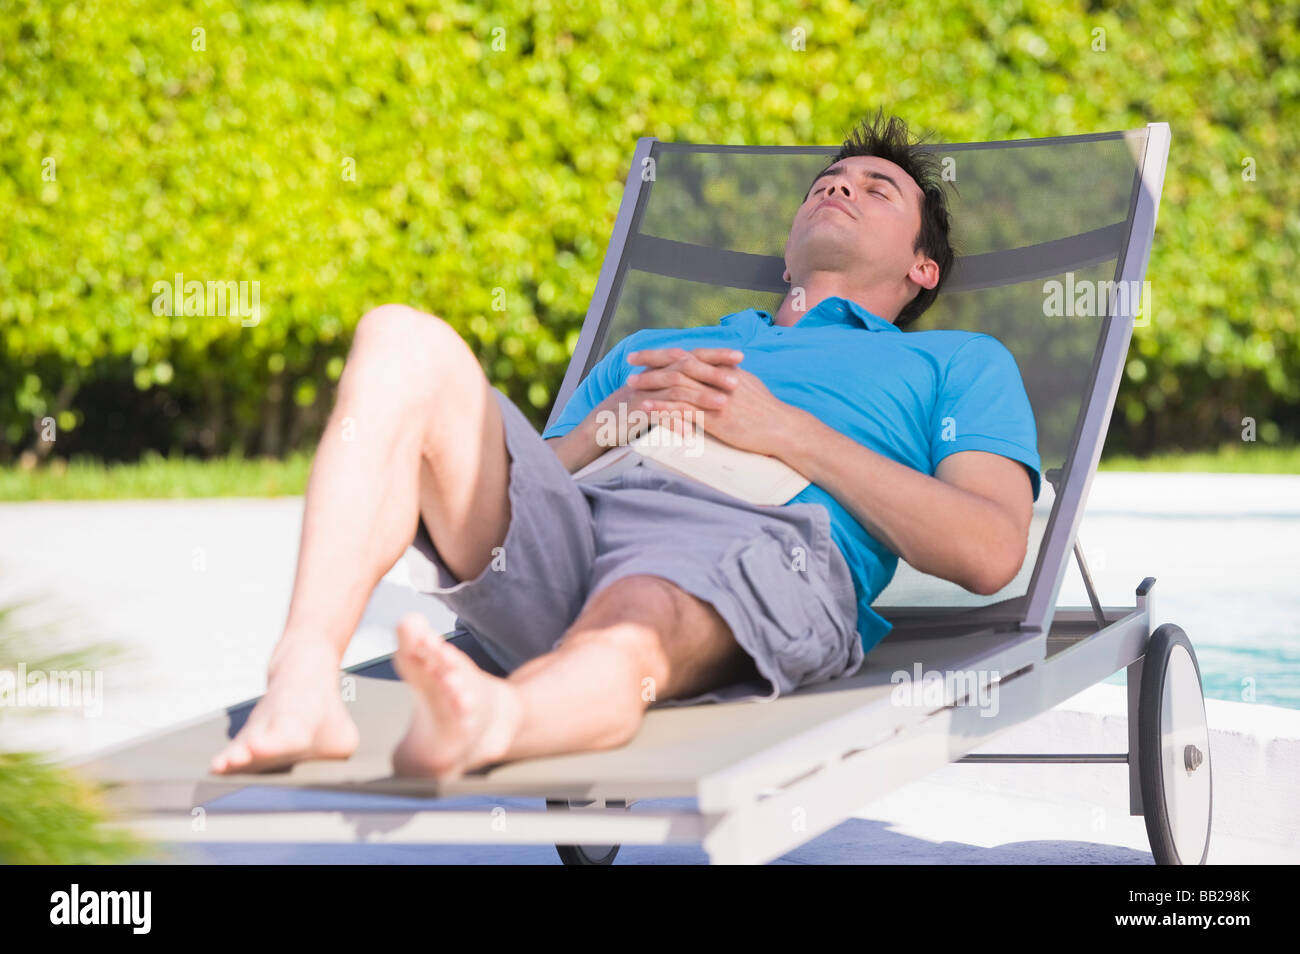 Man resting on a lounge chair Stock Photo - Alamy